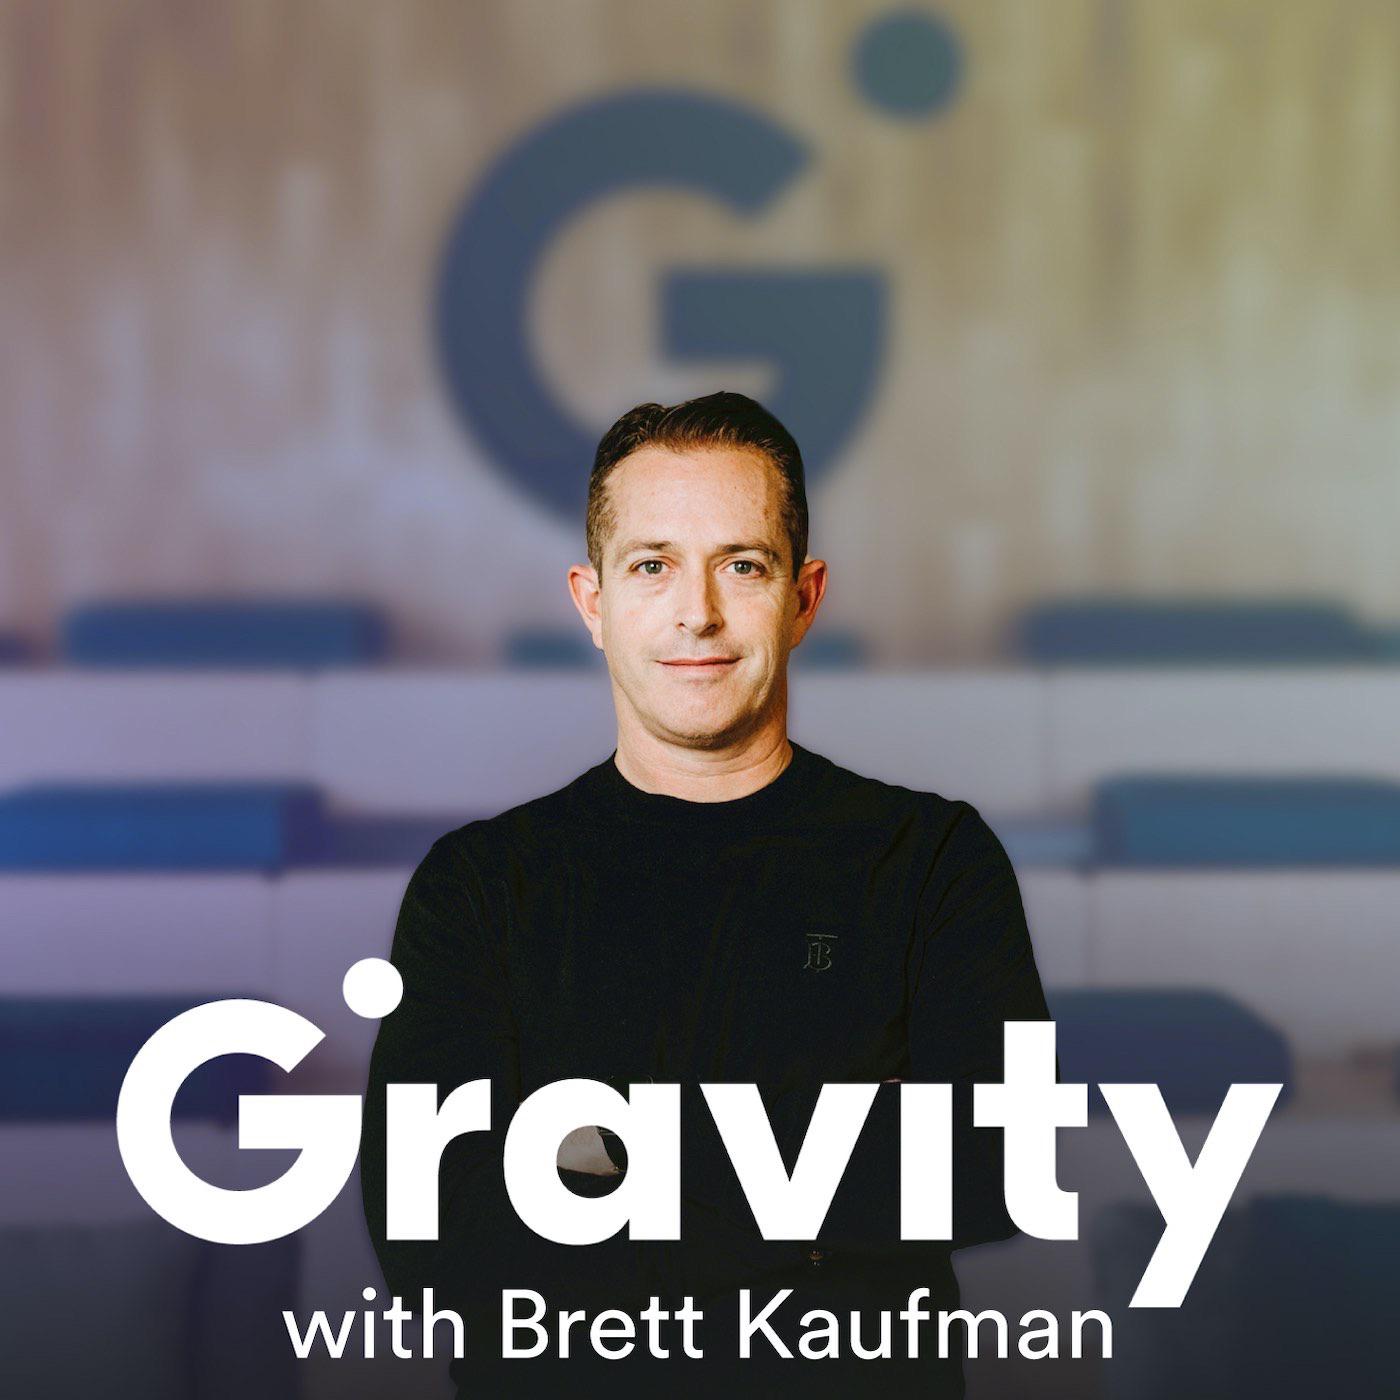 INTERVIEW | Don’t Let Negativity Weigh You Down on The Gravity Podcast